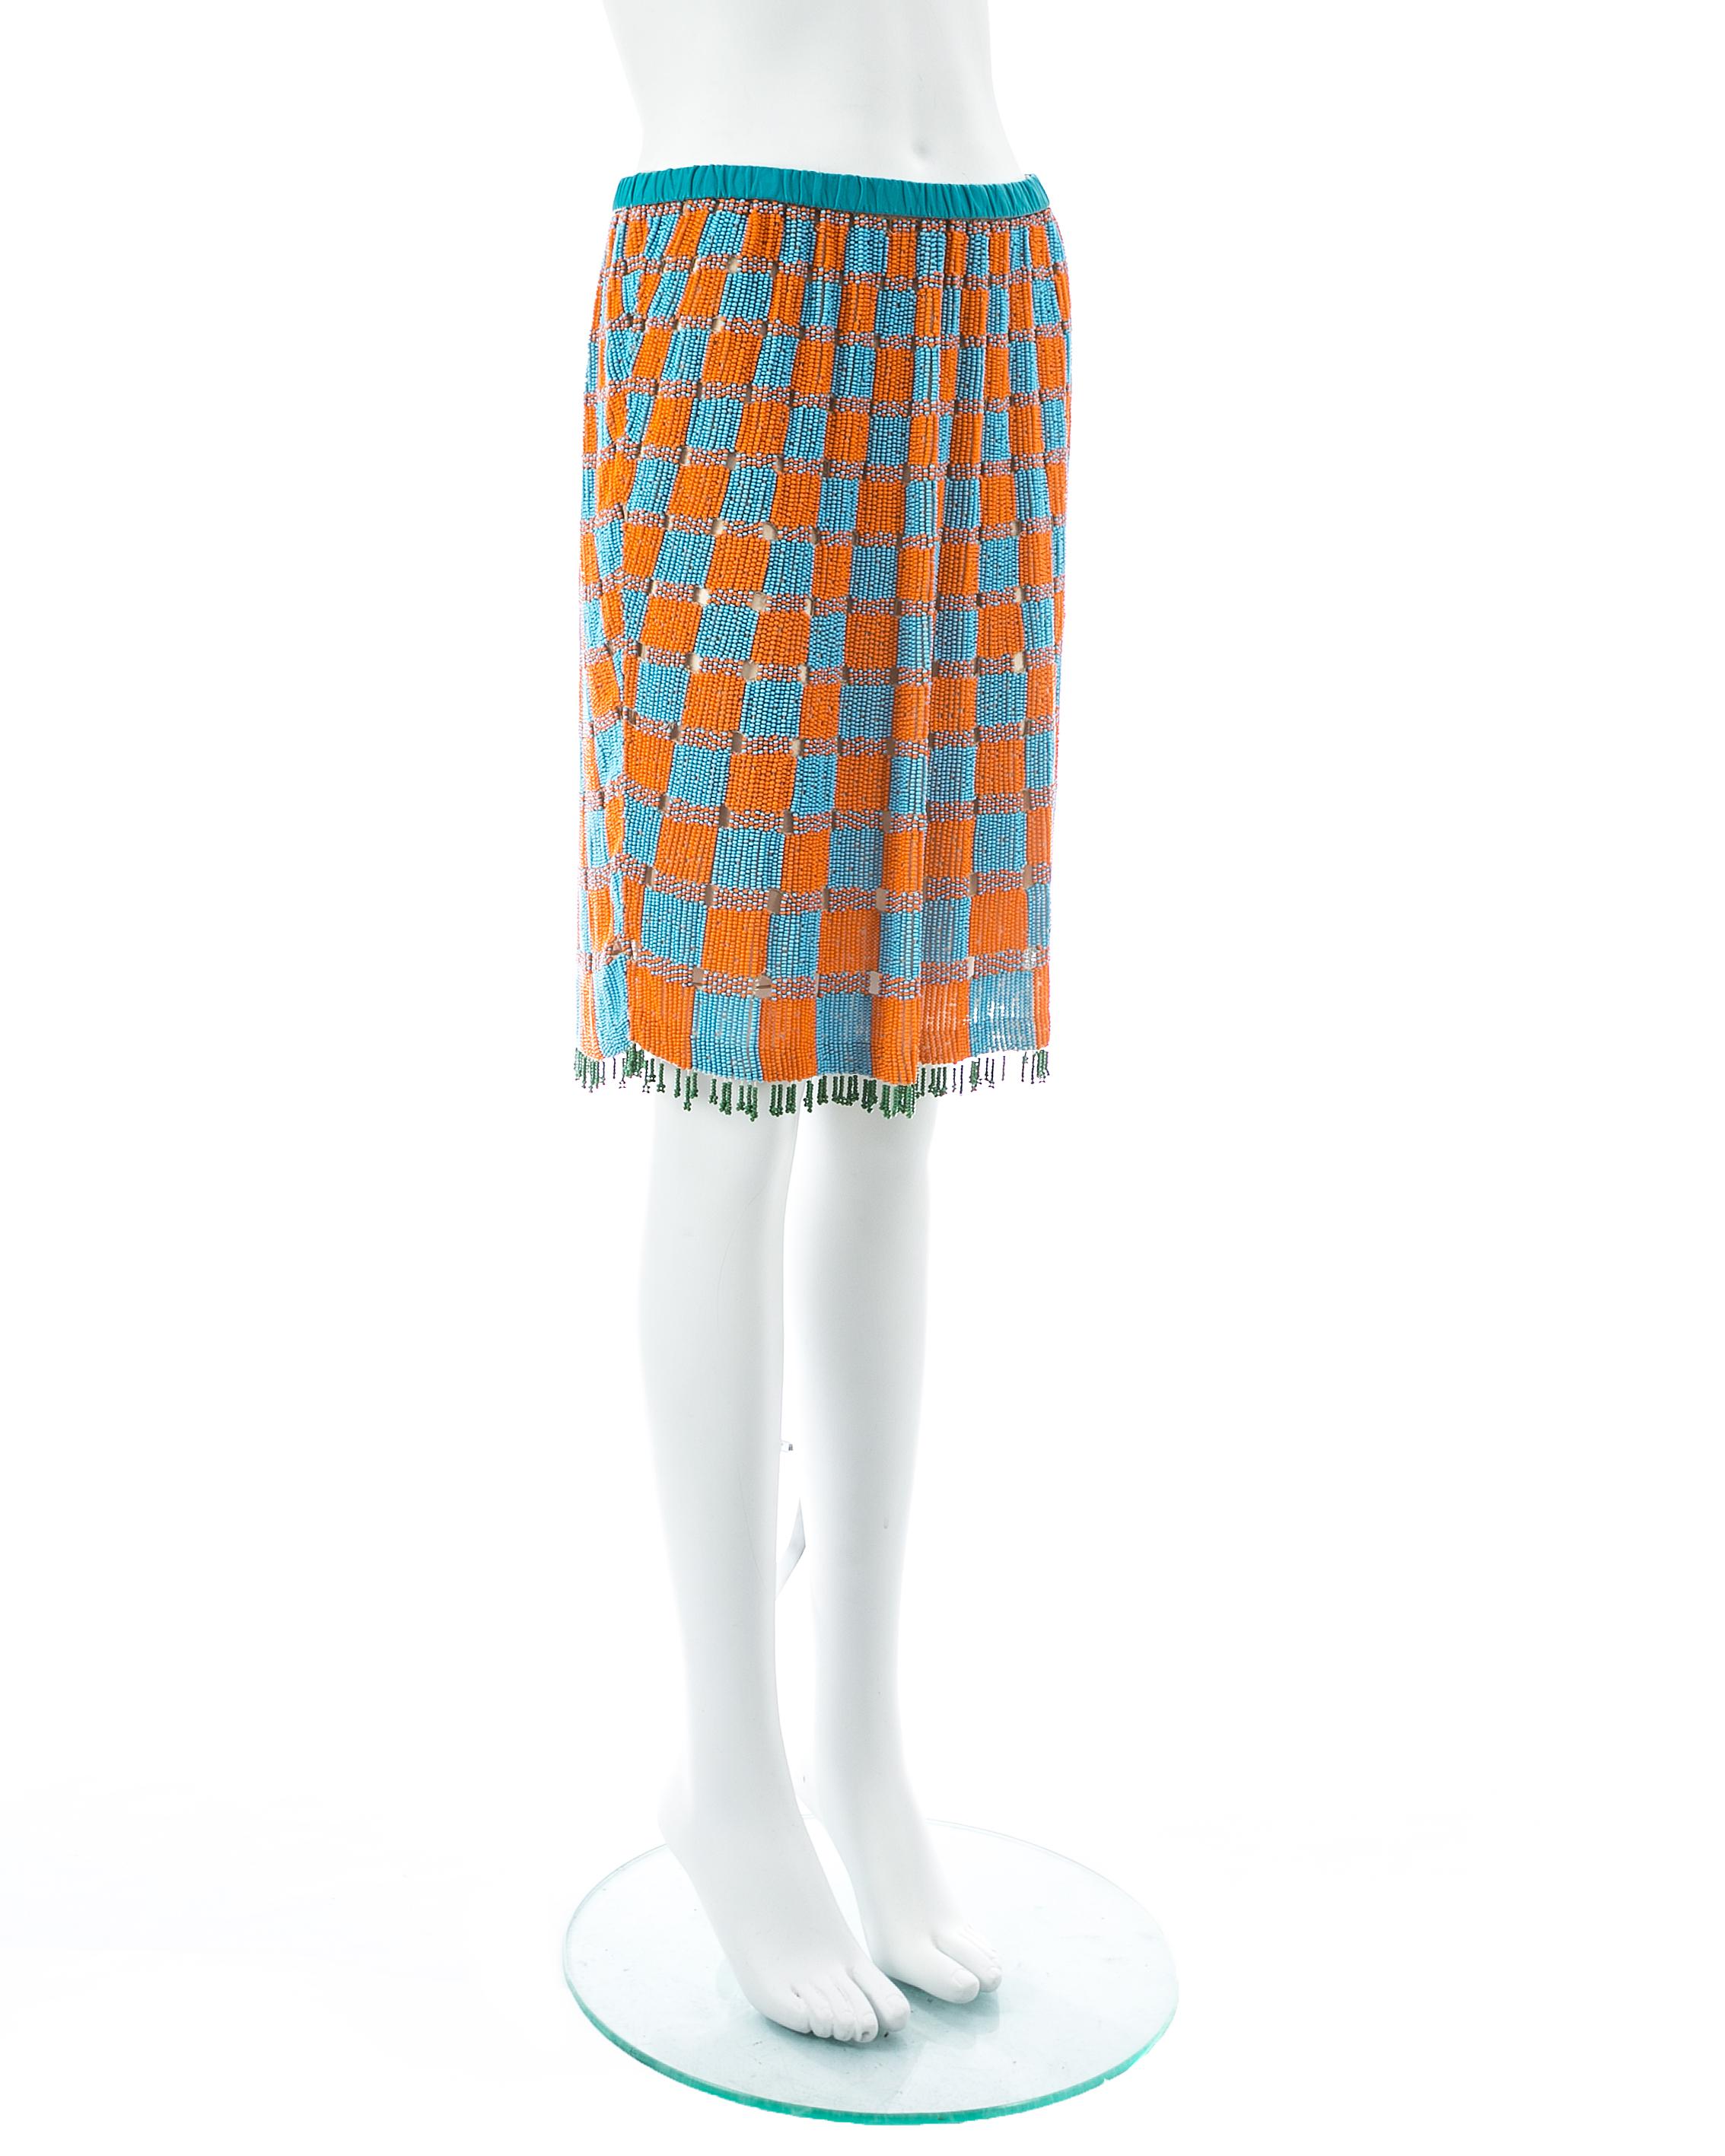 Gucci by Tom Ford orange and blue beaded fringed silk skirt, ss 1999 For Sale 1